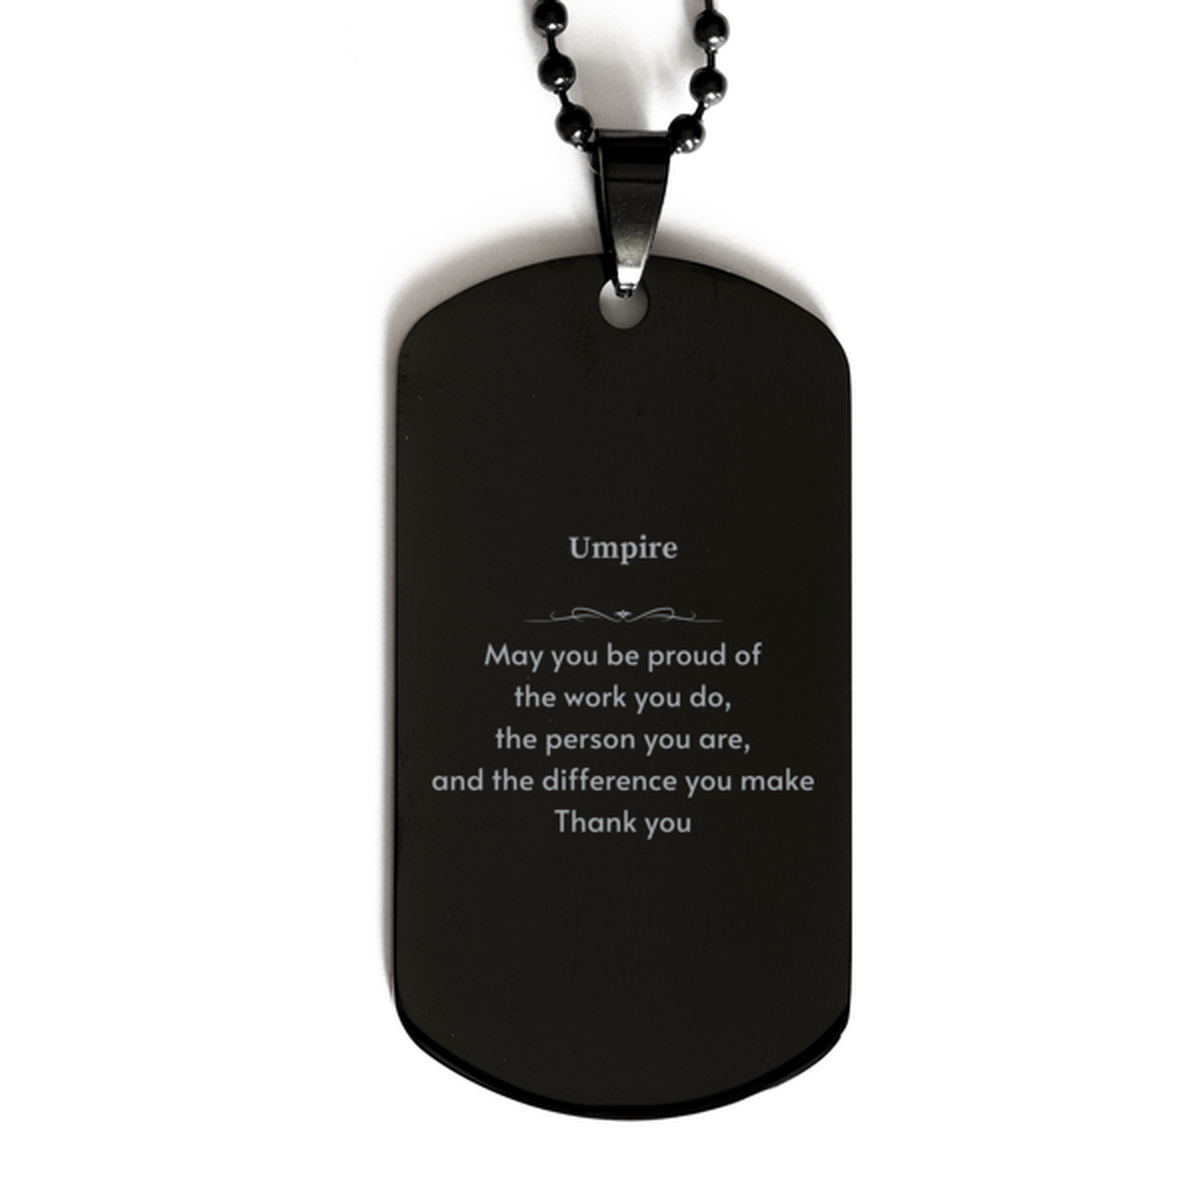 Heartwarming Black Dog Tag Retirement Coworkers Gifts for Umpire, Umpire May You be proud of the work you do, the person you are Gifts for Boss Men Women Friends